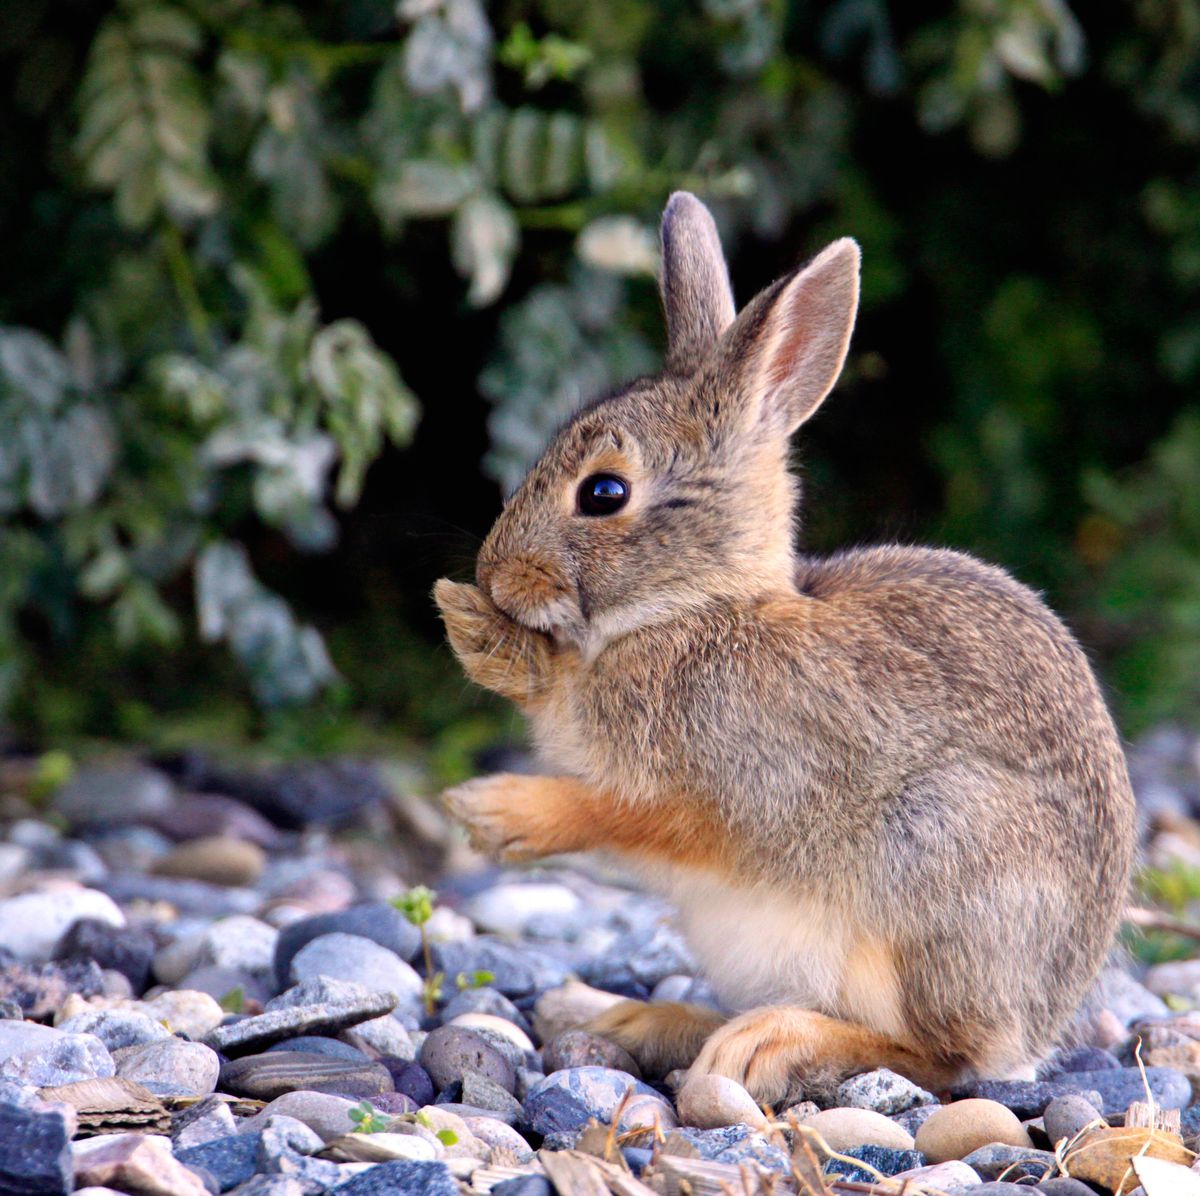 How to Keep Rabbits Out of Garden - 5 Best Rabbit Repellents